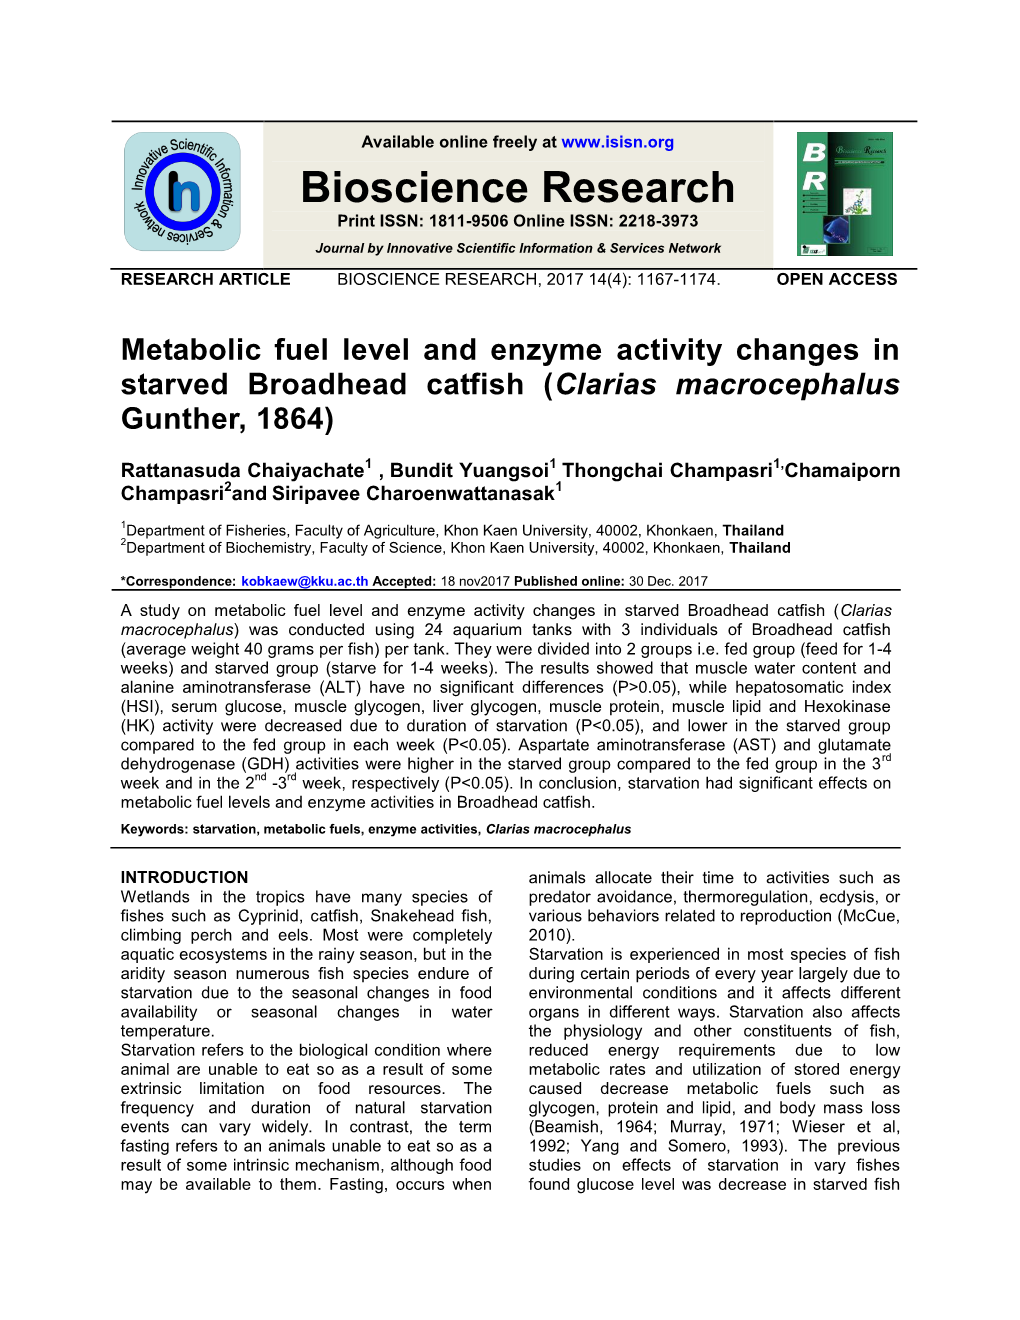 Metabolic Fuel Level and Enzyme Activity Changes in Starved Broadhead Catfish (Clarias Macrocephalus Gunther, 1864)